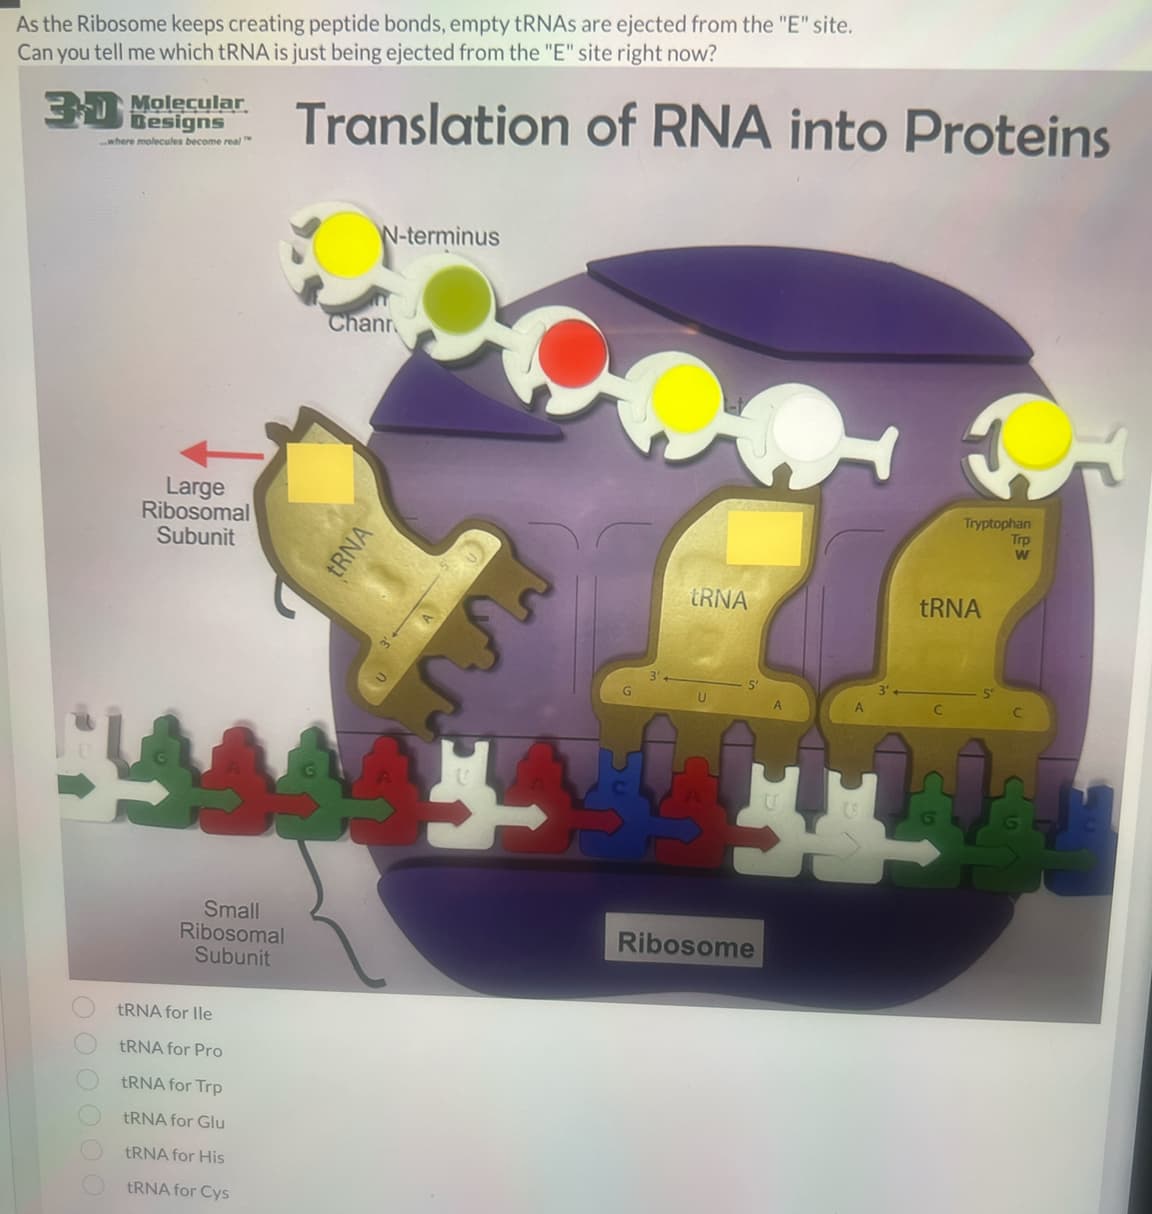 As the Ribosome keeps creating peptide bonds, empty tRNAs are ejected from the "E" site.
Can you tell me which tRNA is just being ejected from the "E" site right now?
30 Molecular
Designs
where molecules become real
000 00
Large
Ribosomal
Subunit
Small
Ribosomal
Subunit
tRNA for lle
tRNA for Pro
tRNA for Trp
tRNA for Glu
tRNA for His
tRNA for Cys
Translation of RNA into Proteins
N-terminus
Chann
tRNA
G
tRNA
U
A
본본
Ribosome
Tryptophan
Trp
W
tRNA
5′